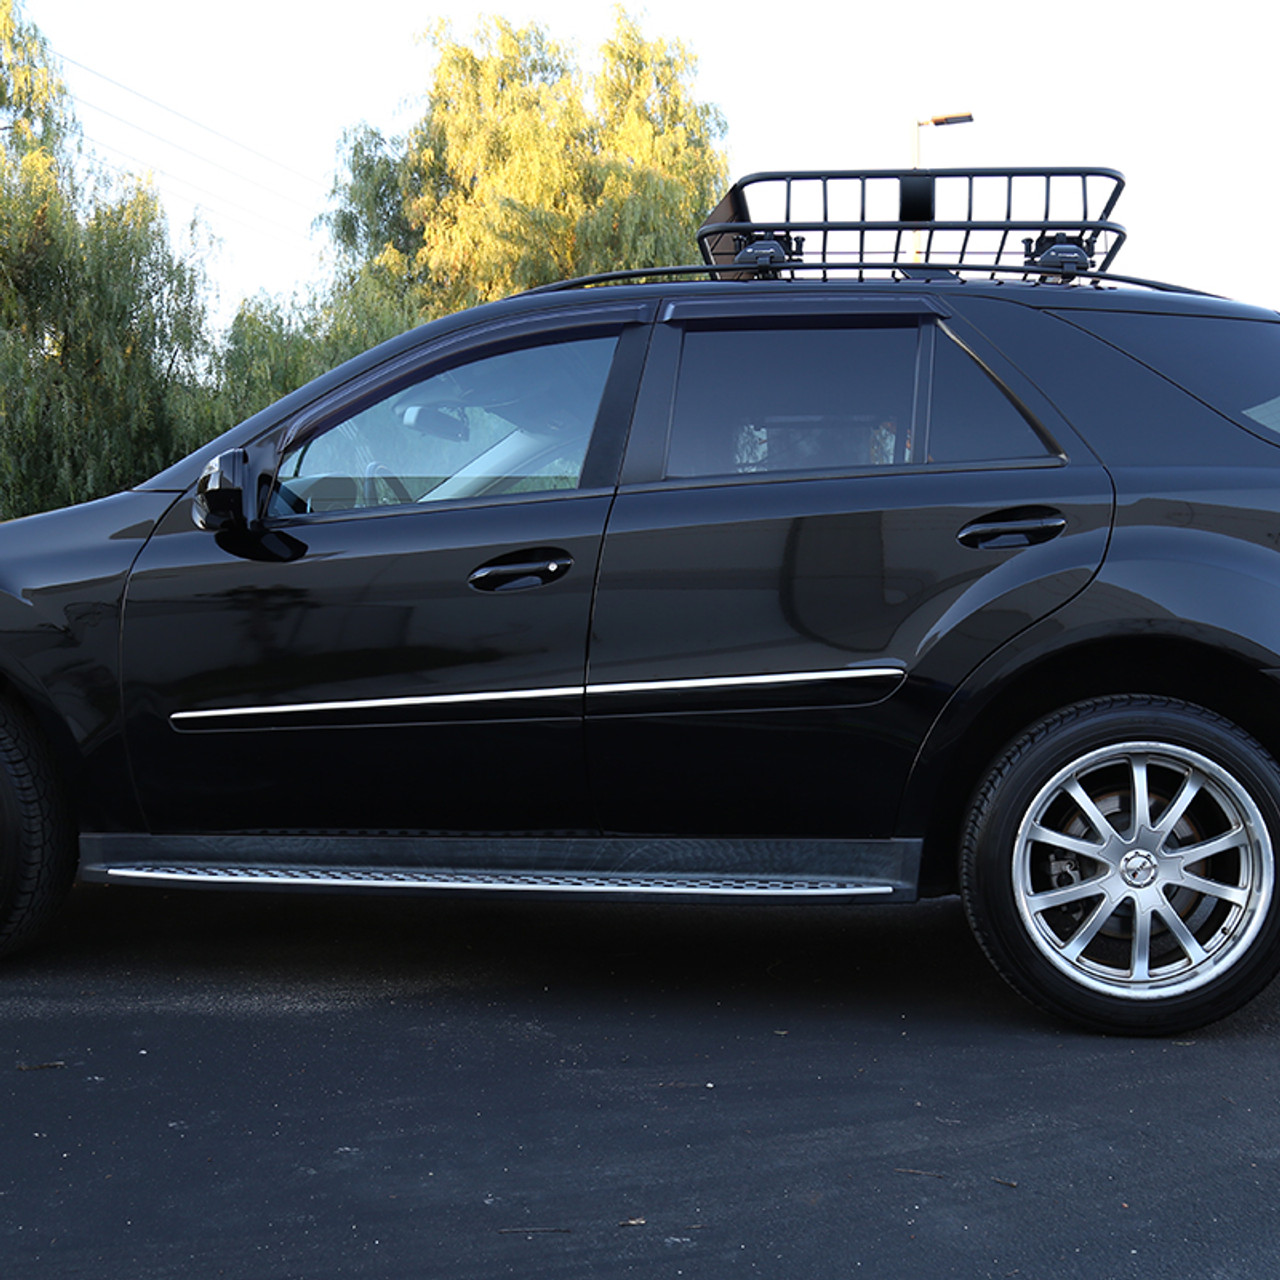 Universal Black Roof Rack Cargo Carrier w/ Extendable Luggage Hold Basket -  Spec-D Tuning